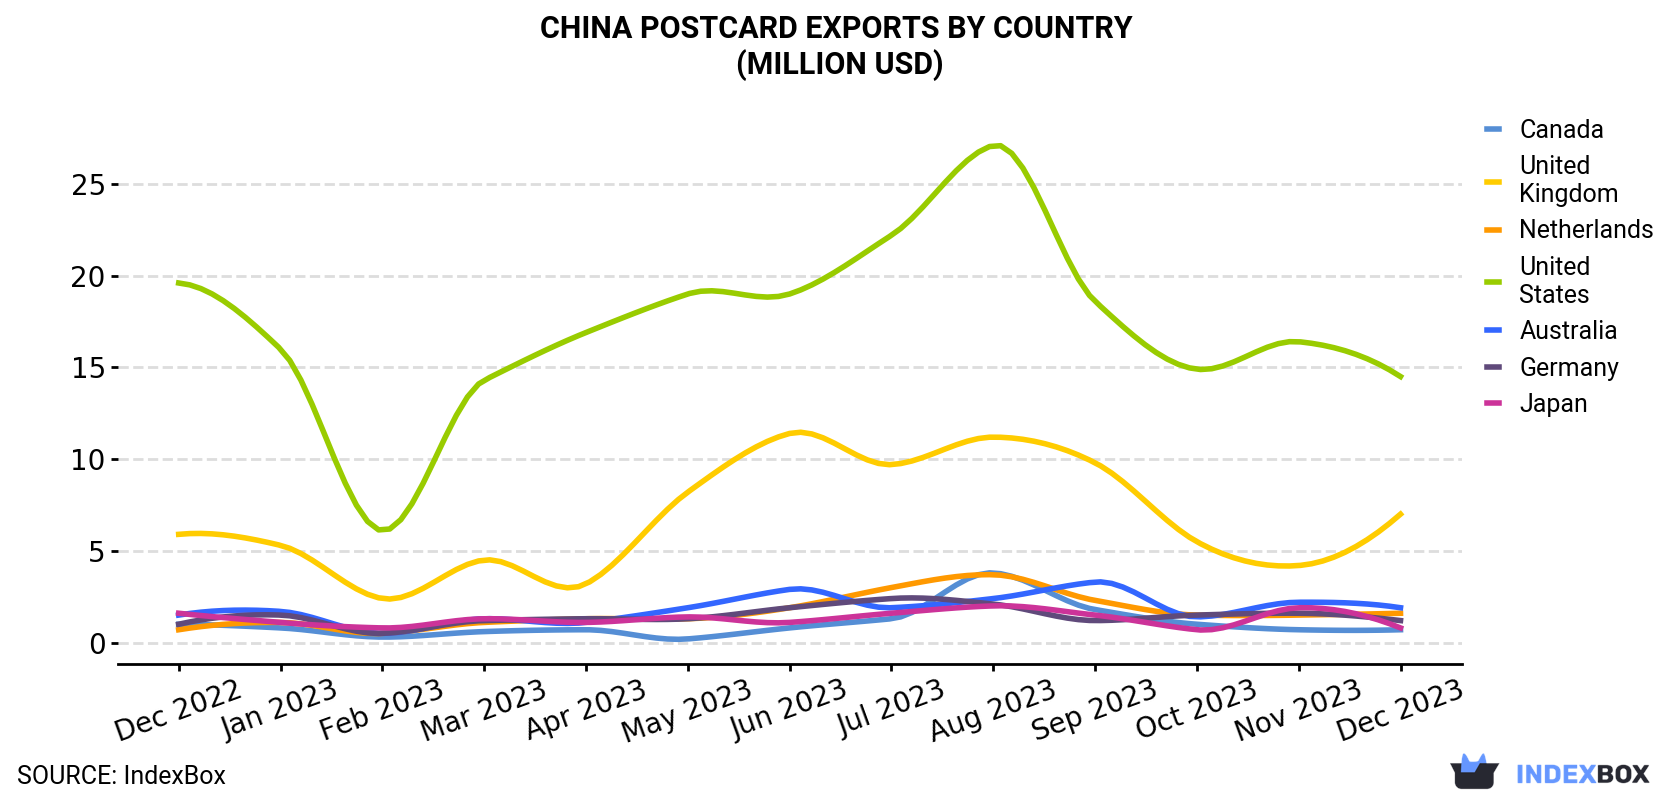 China Postcard Exports By Country (Million USD)